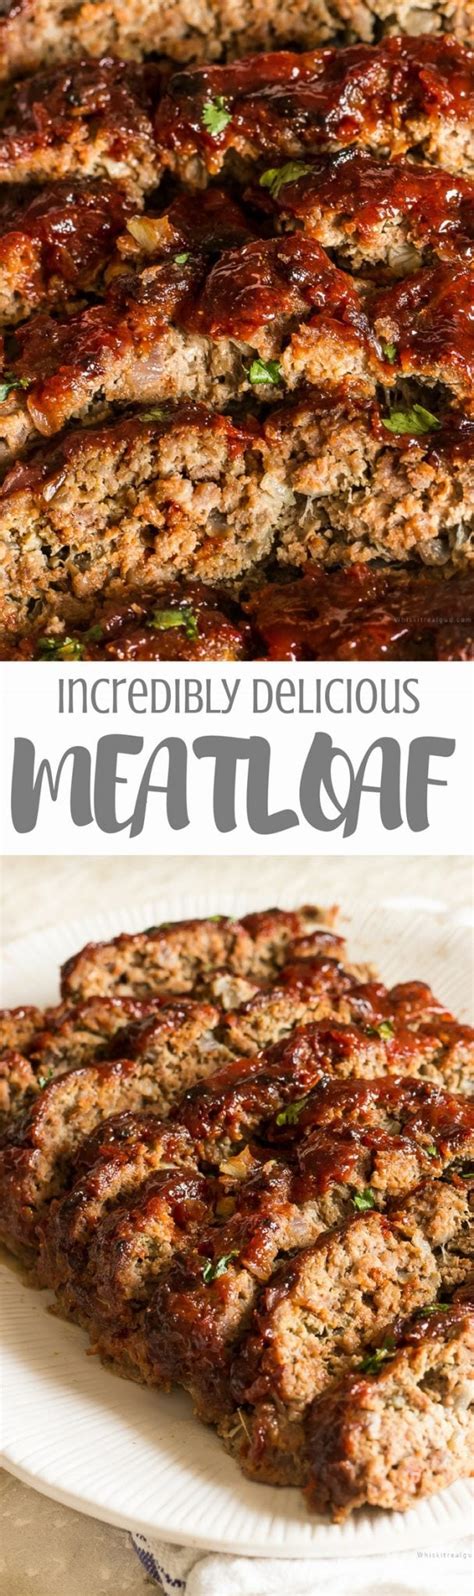 the best meatloaf recipe l whisk it real gud